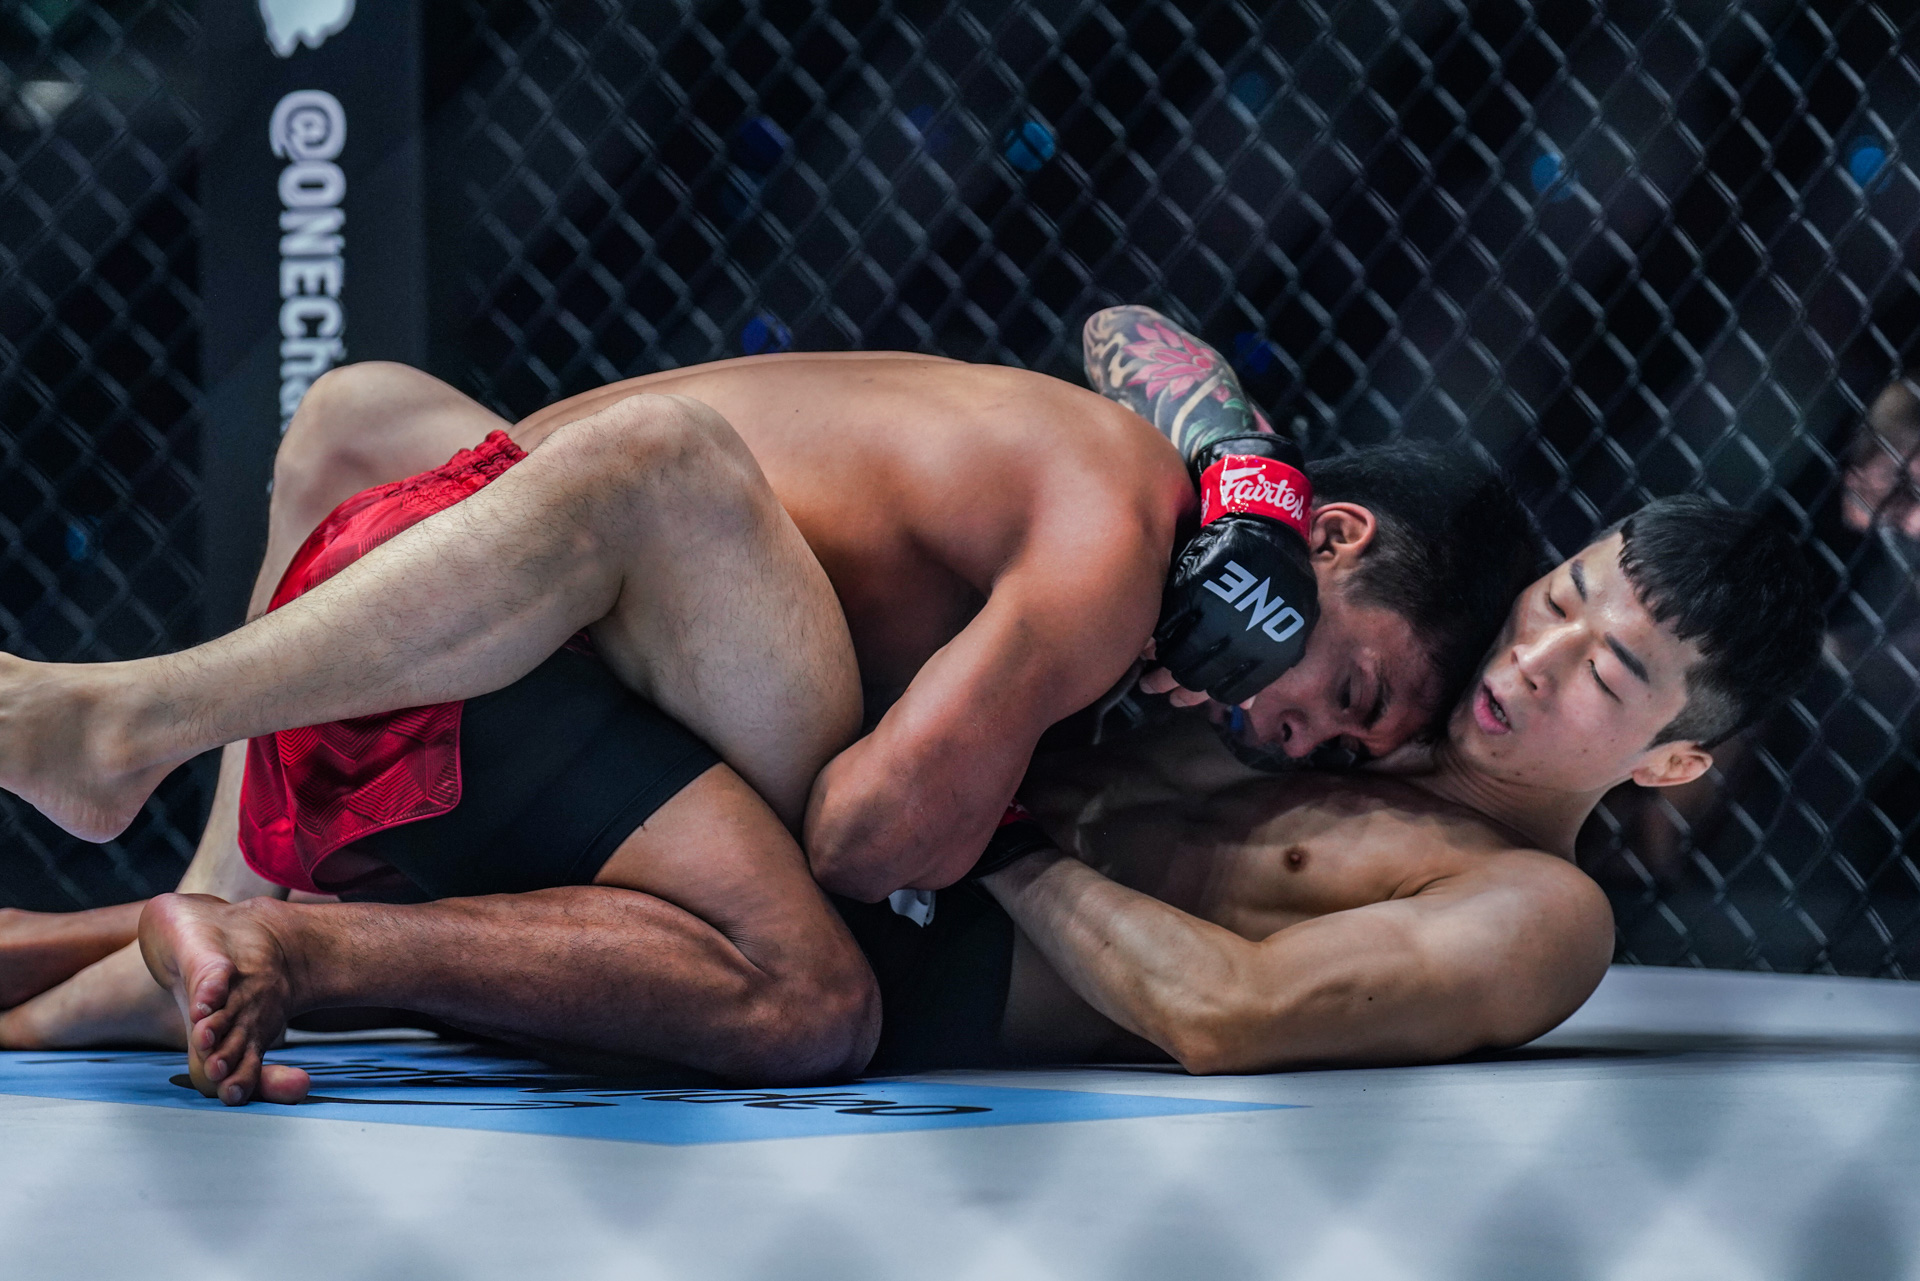 ONE-on-Prime-Video-4-Kim-Jae-Woong-VS-Kevin-Belingon-3 ONE: Kevin Belingon stopped by Kim Jae Woong as skid continues Mixed Martial Arts News ONE Championship  - philippine sports news